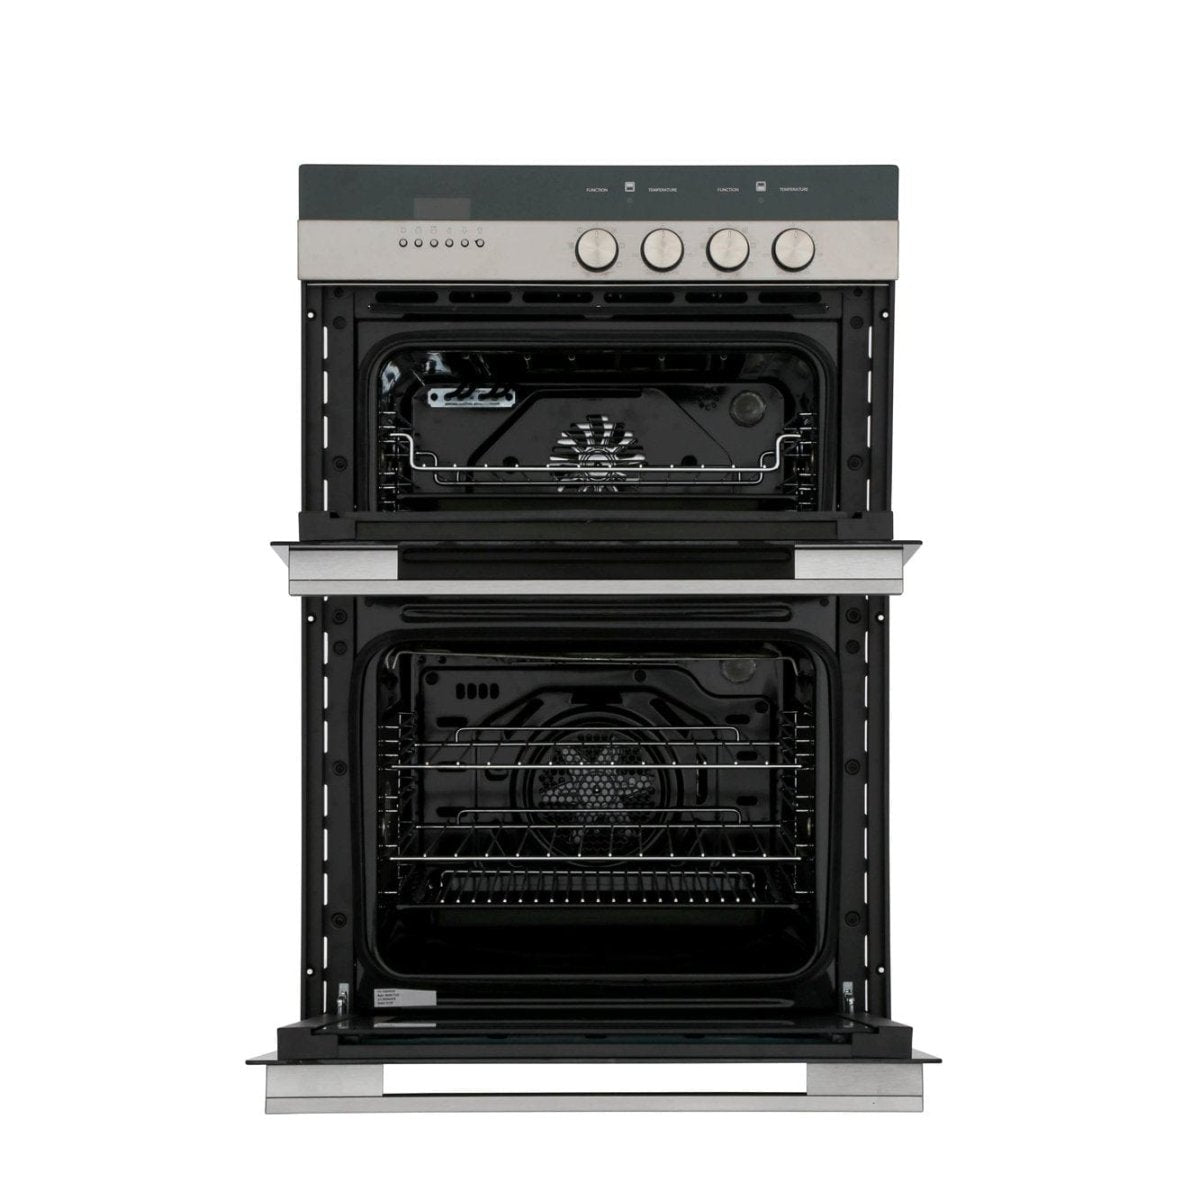 Fisher & Paykel Designer OB60B77CEX3 Built In Electric Double Oven - Black - Stainless Steel | Atlantic Electrics